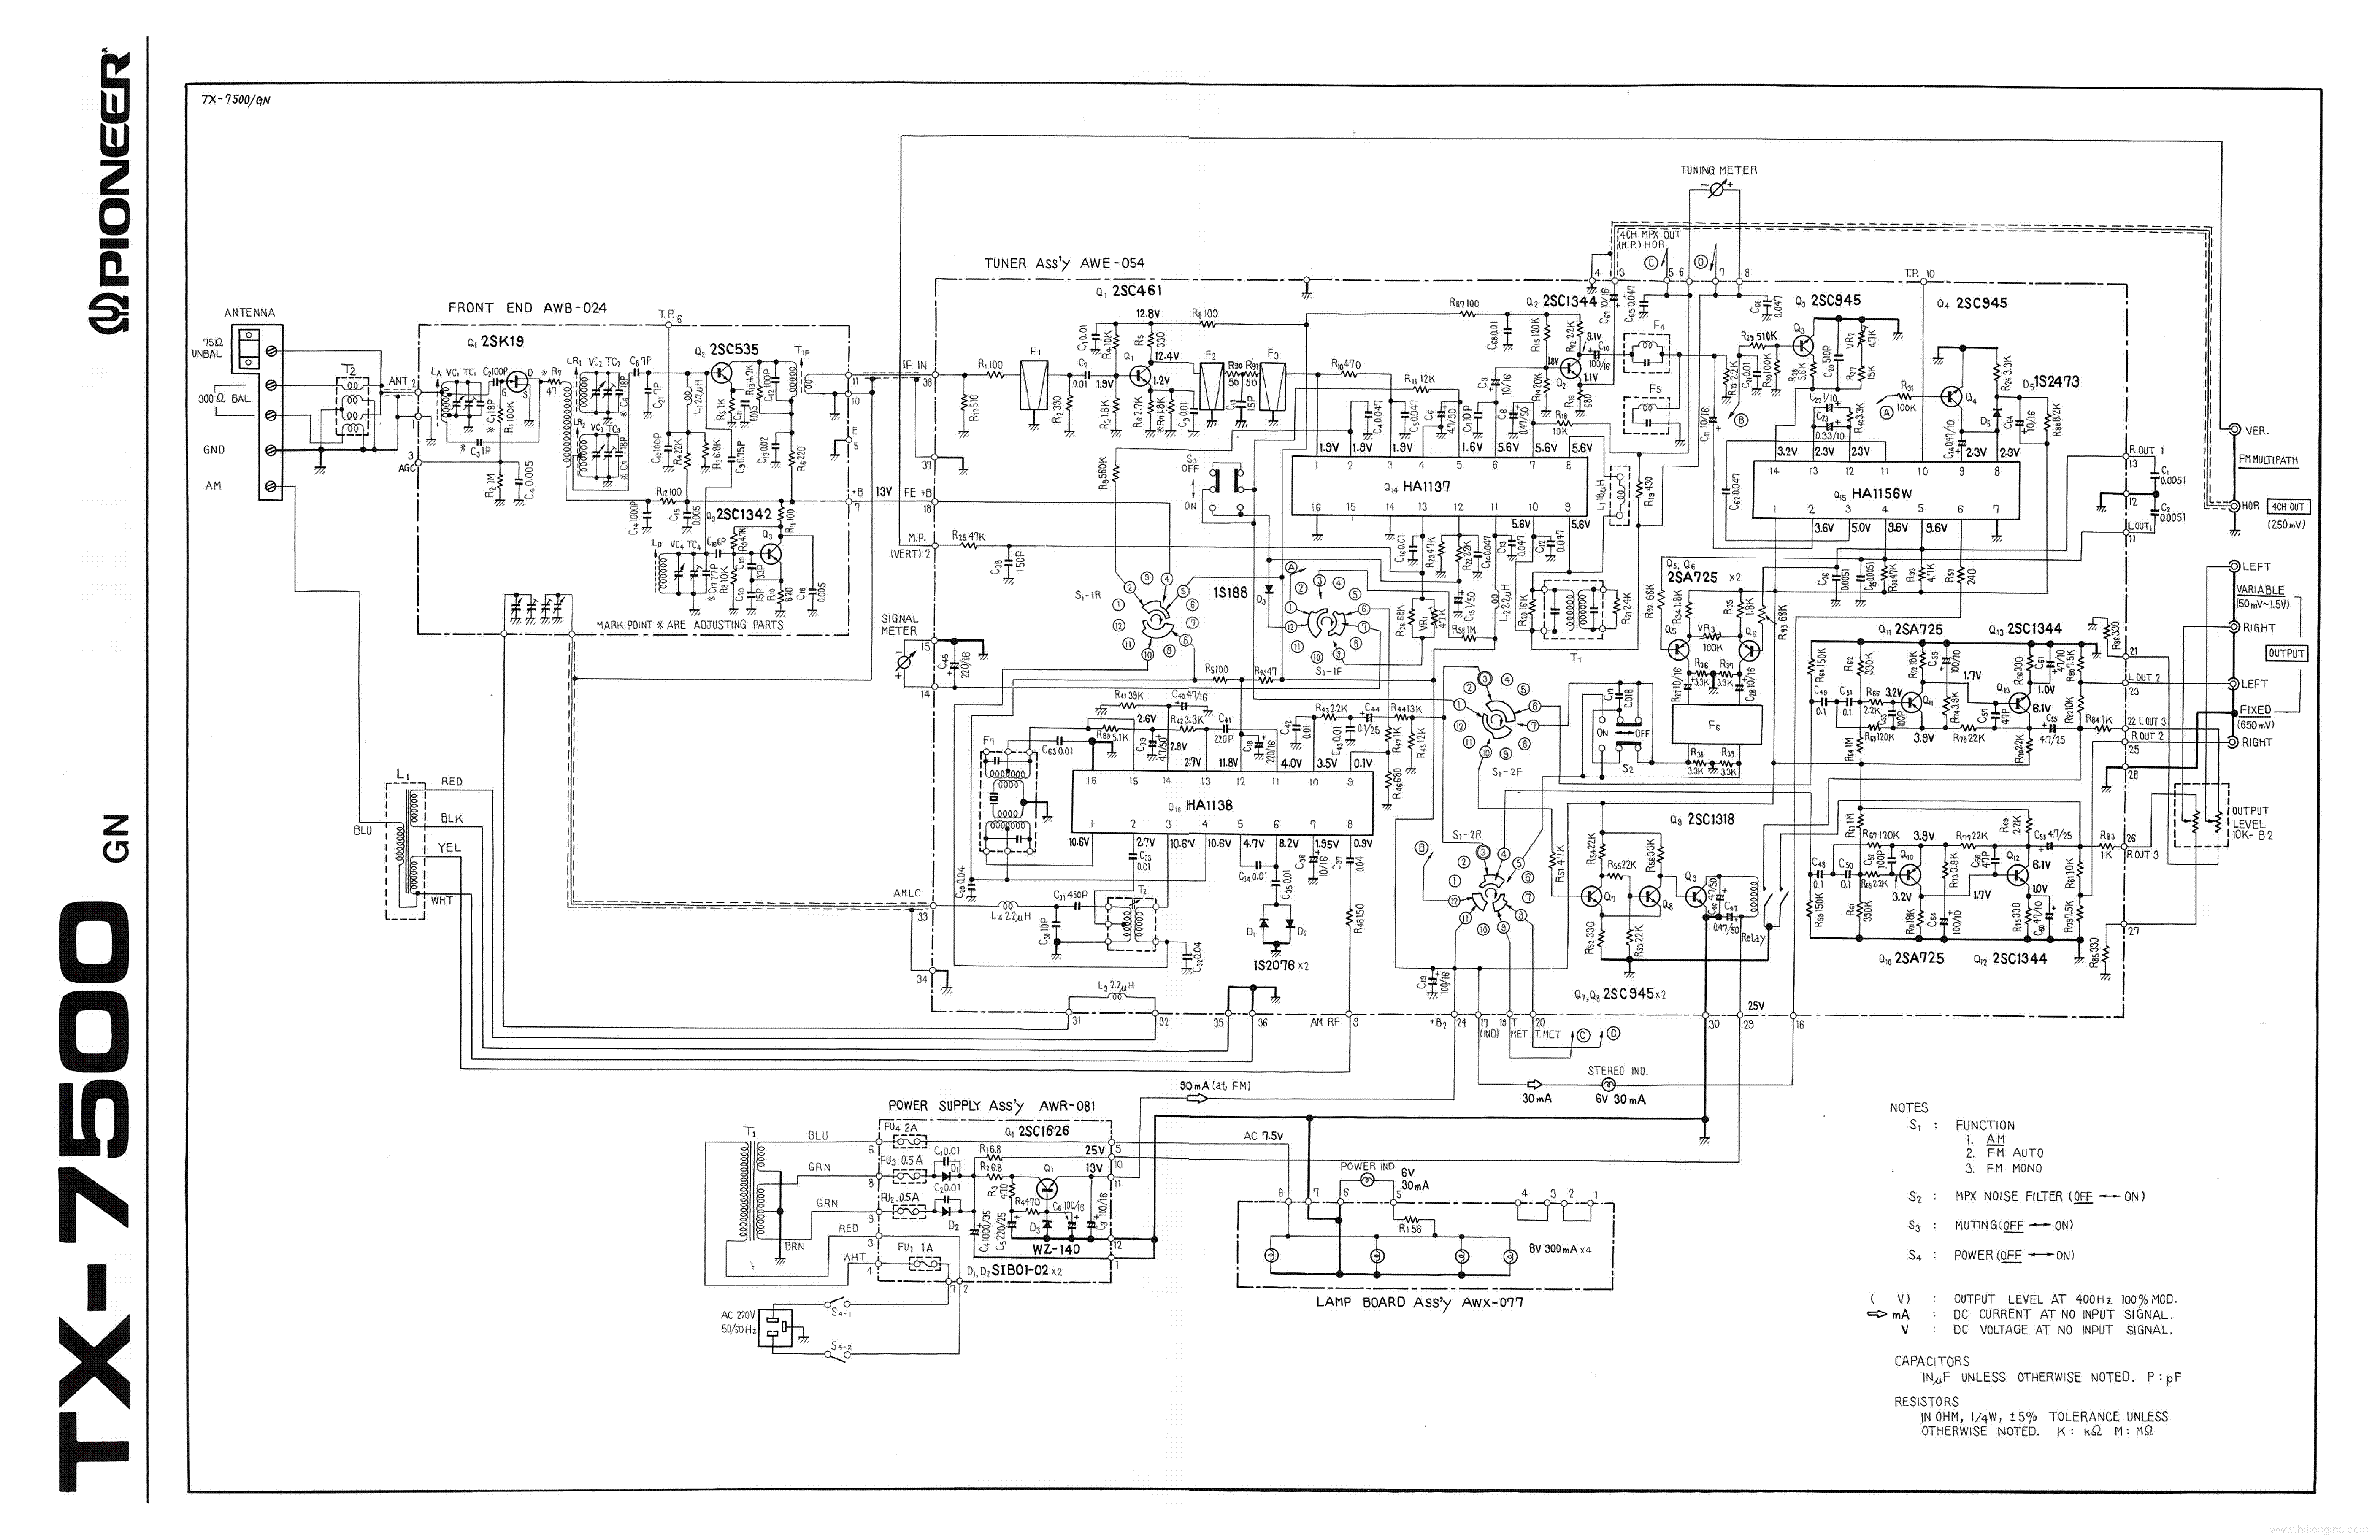 PIONEER TX-7500 SCH service manual (2nd page)